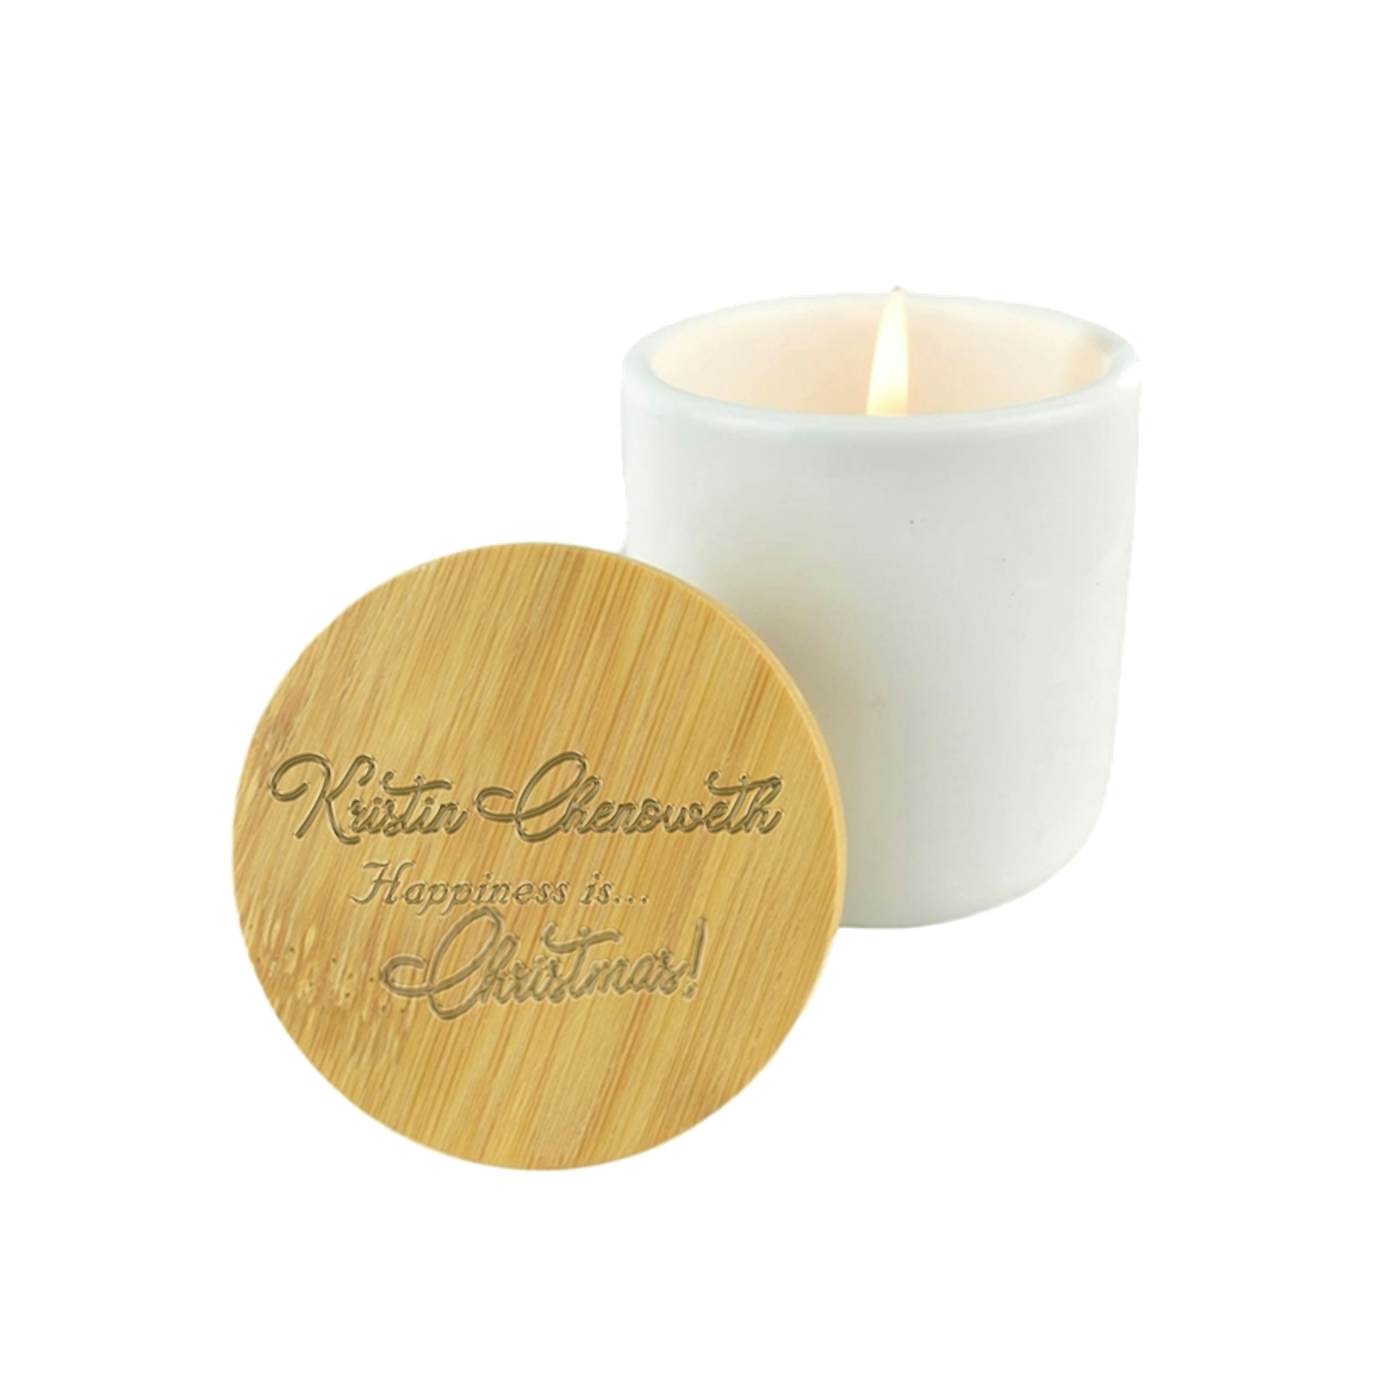 Kristin Chenoweth "HAPPINESS is...Christmas!" Matara Spice Soy Candle